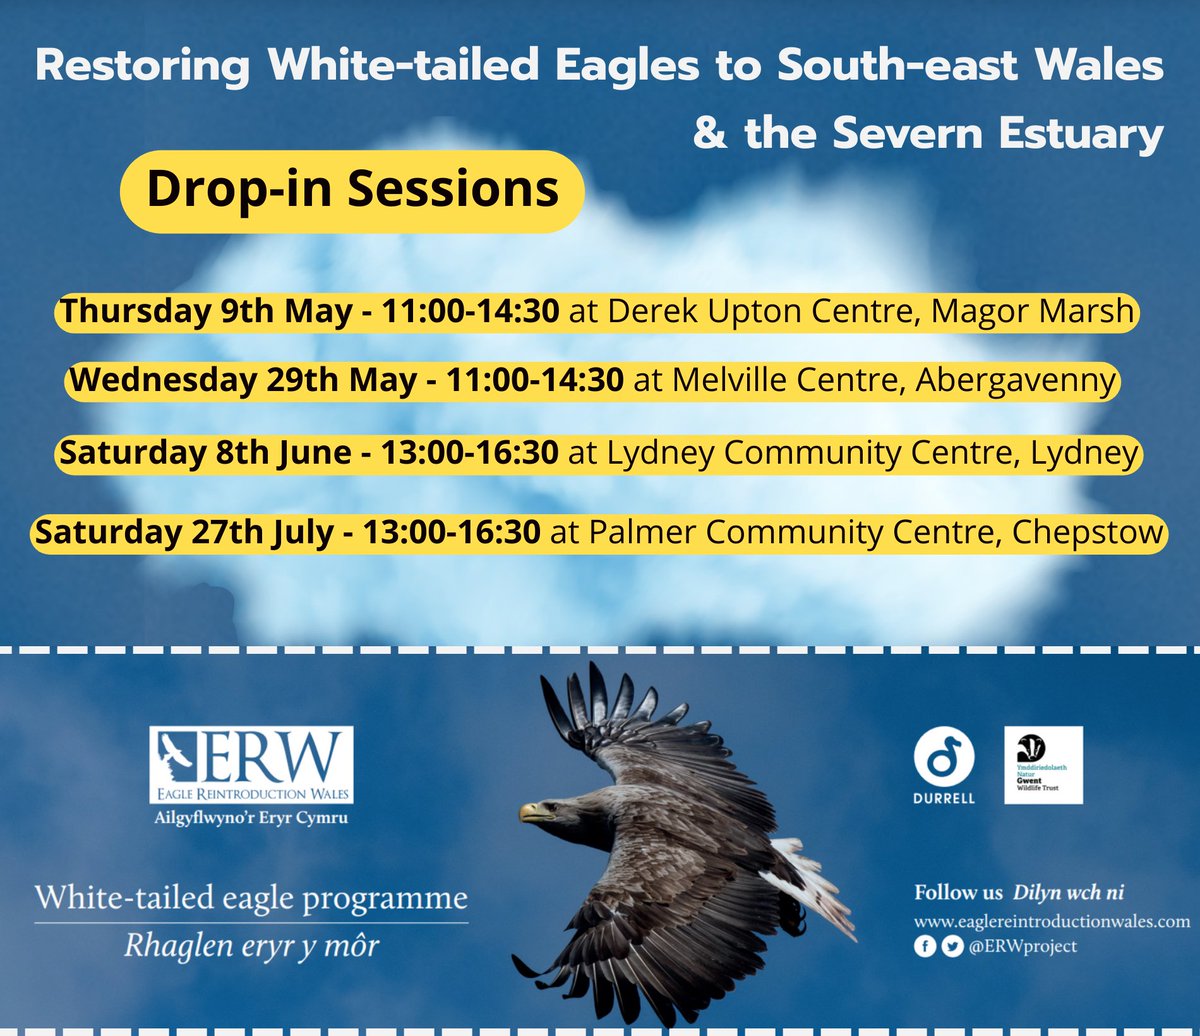 Want to learn more about the return of White-tailed Eagles? - Now’s your chance! 🦅🏴󠁧󠁢󠁷󠁬󠁳󠁿 We are hosting four public drop-in sessions across South-east Wales & Severn Estuary. Make sure you drop-in to say hello, show your support or express your concerns! 👍💬👎